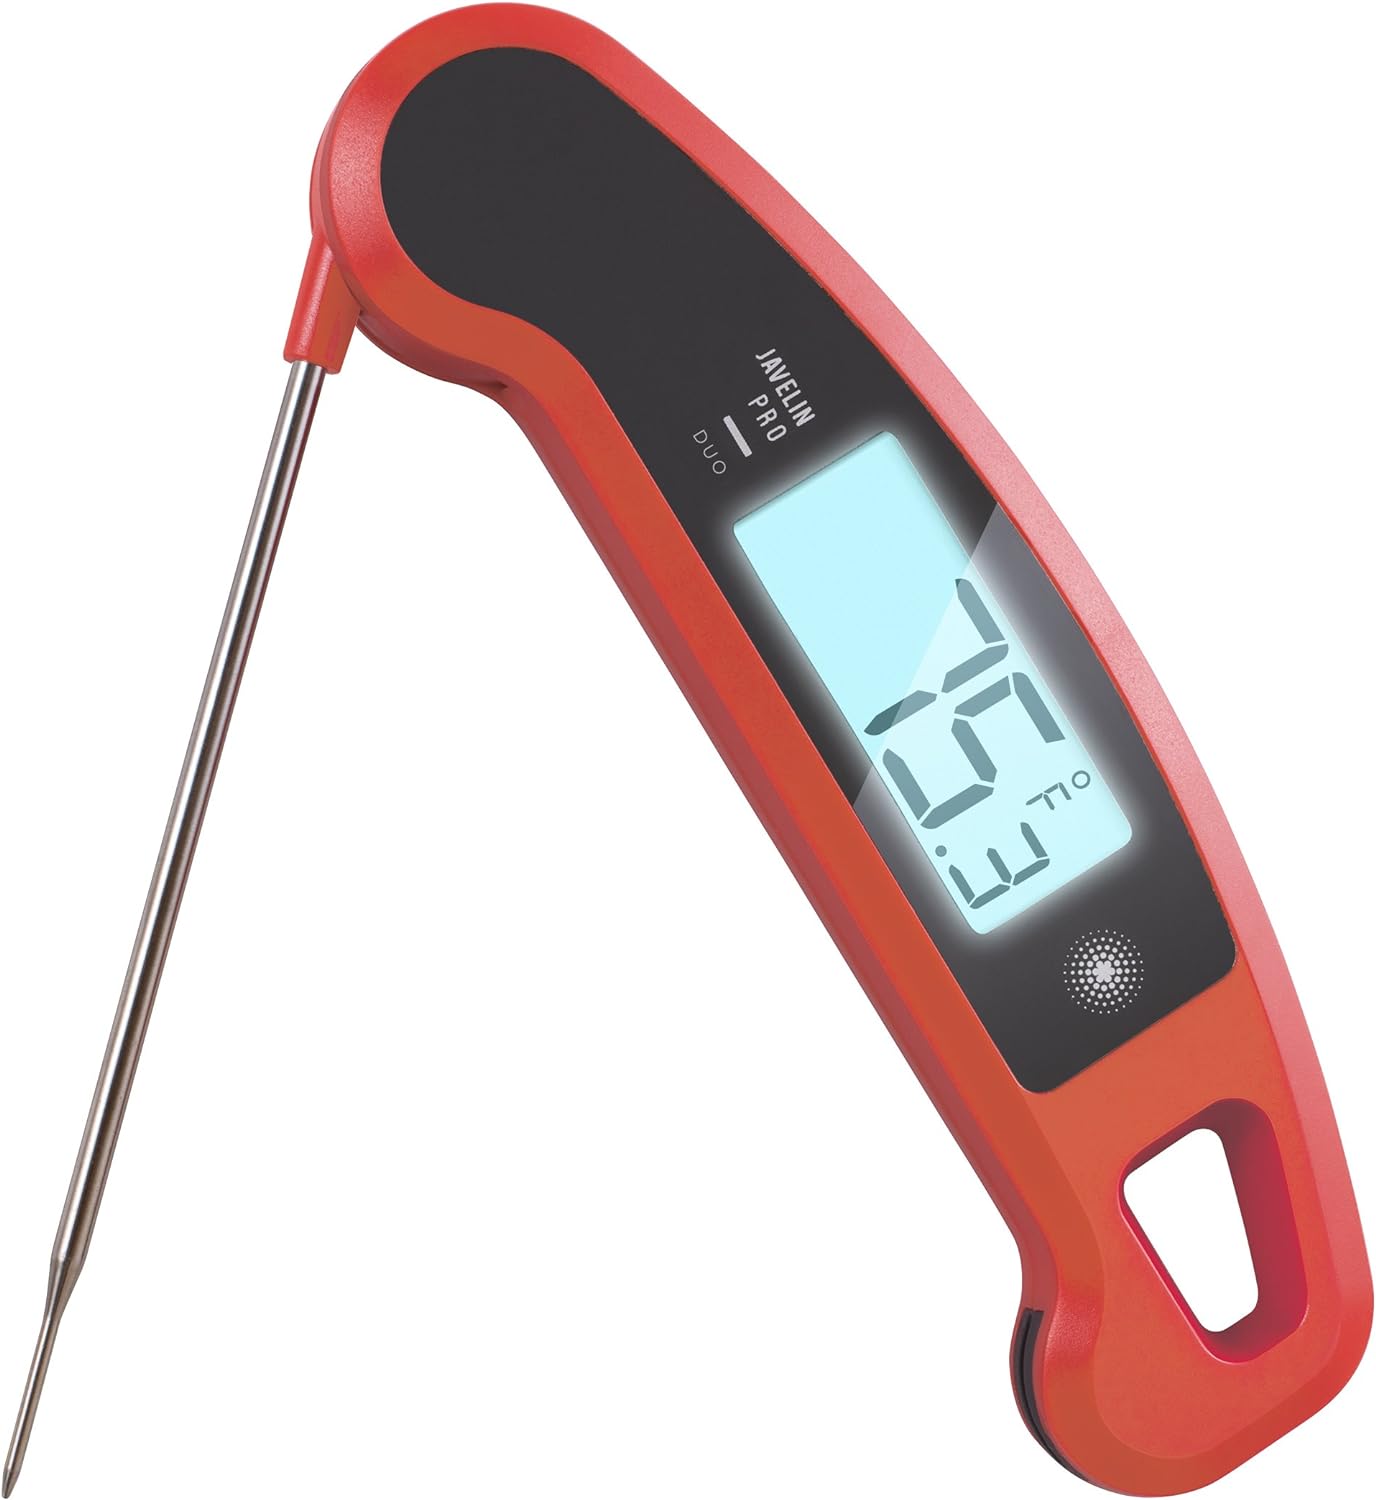 Lavatools PX1D Javelin PRO Duo Ultra Fast Professional Digital Instant Read Meat Thermometer for Grill and Cooking, 4.5 Probe, Auto-Rotating Backlit Display, Splash Resistant – Sambal